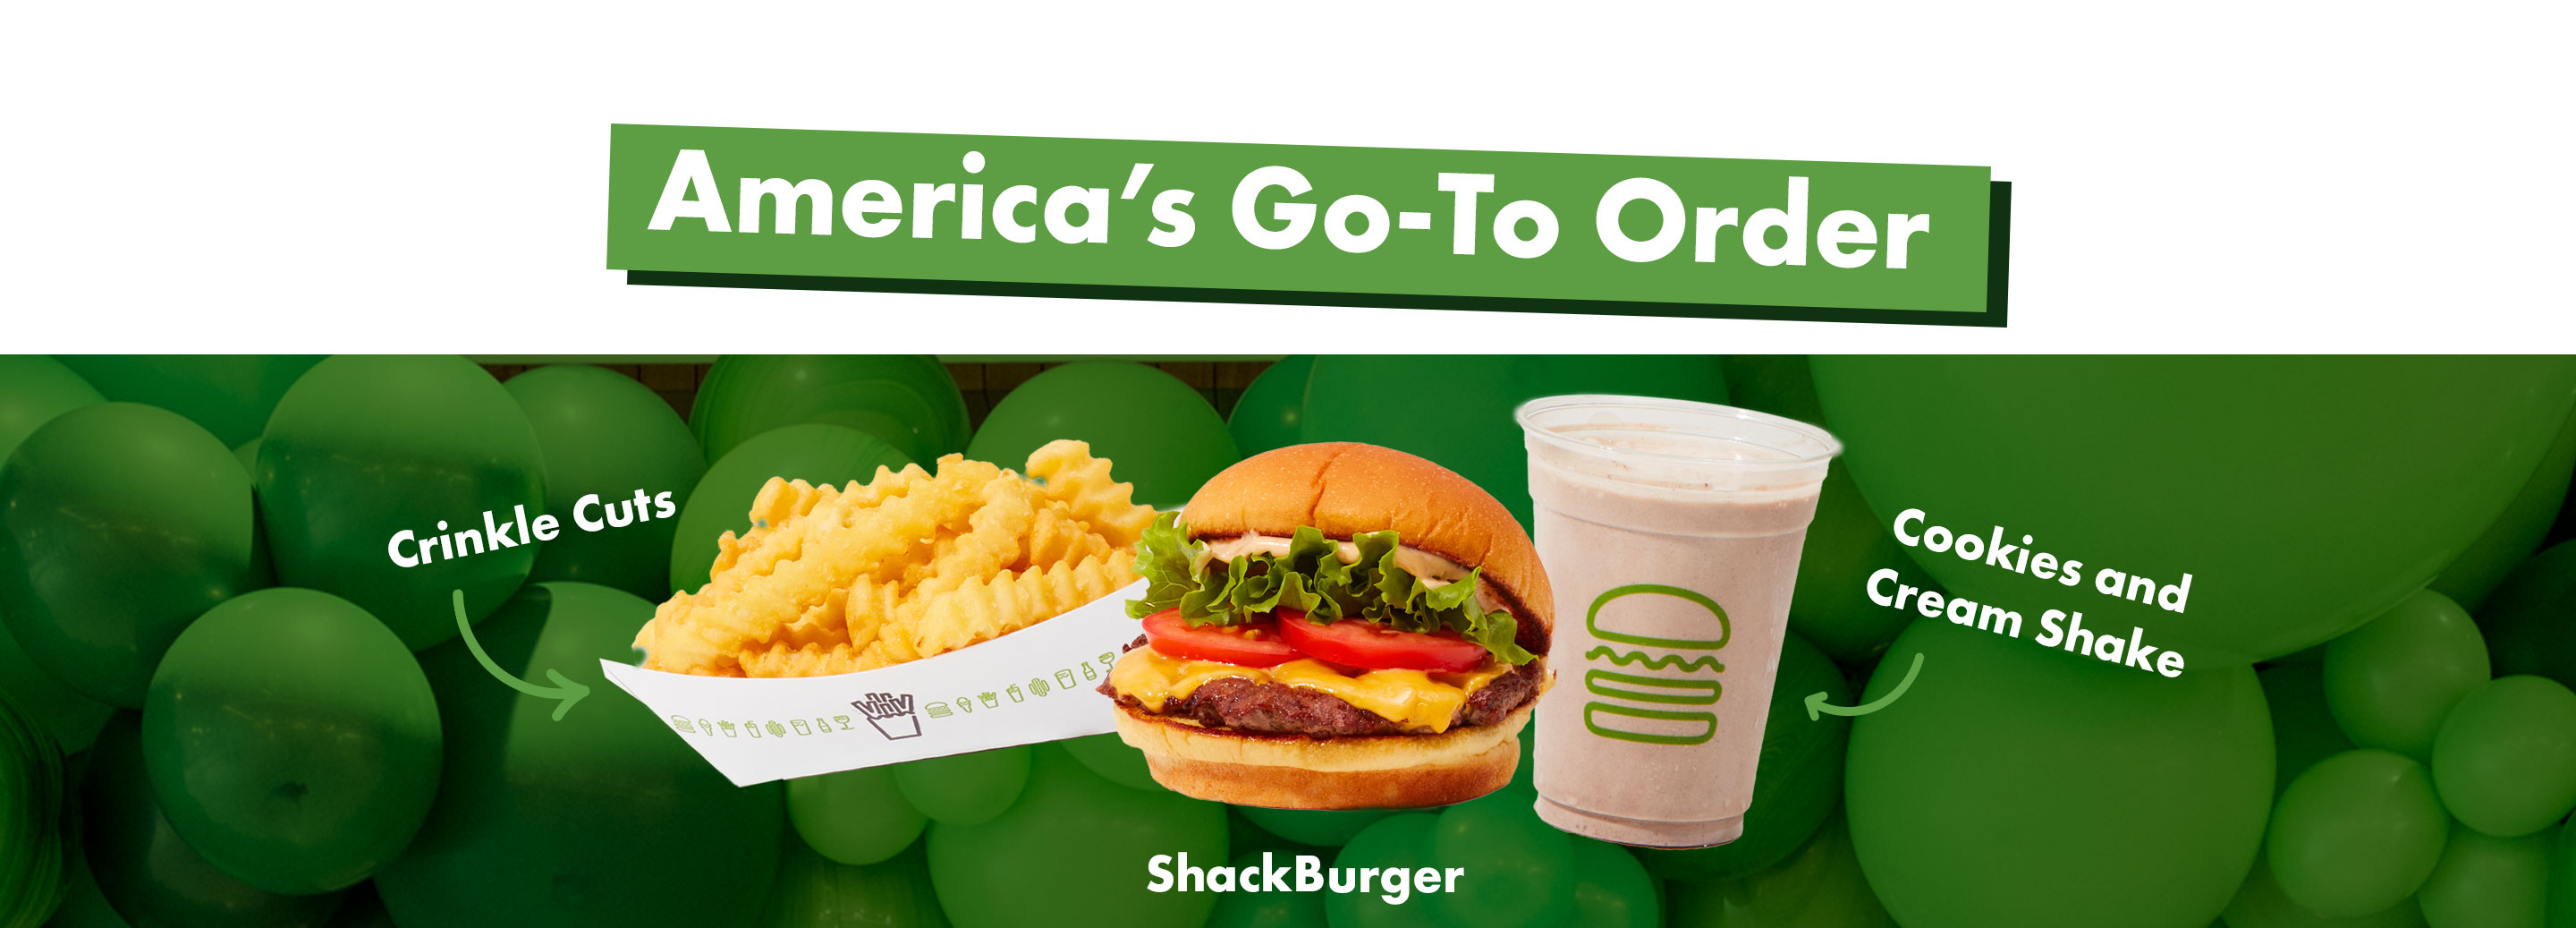 America's Go-To Order